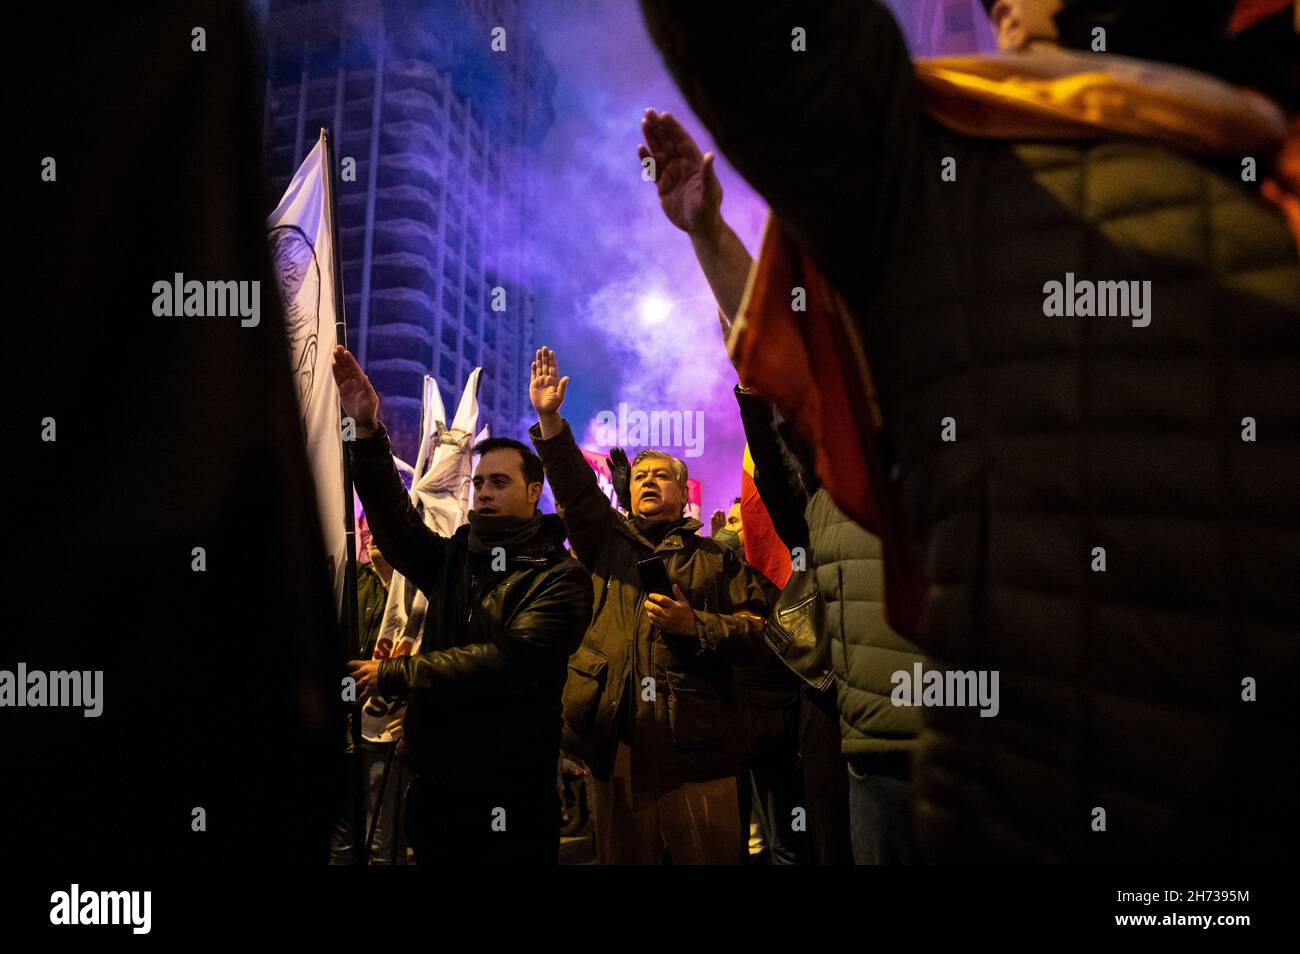 Madrid, Spain. 19th Nov, 2021. Far right wing members and supporters of La Falange are seen raising their hands making a fascist salute during a demonstration for the anniversary of the death of Jose Antonio Primo de Rivera, founder of La Falange, commemorating the 85th anniversary of his death on 20 November 1936, shot at the beginning of the Spanish Civil War. Credit: Marcos del Mazo/Alamy Live News Stock Photo